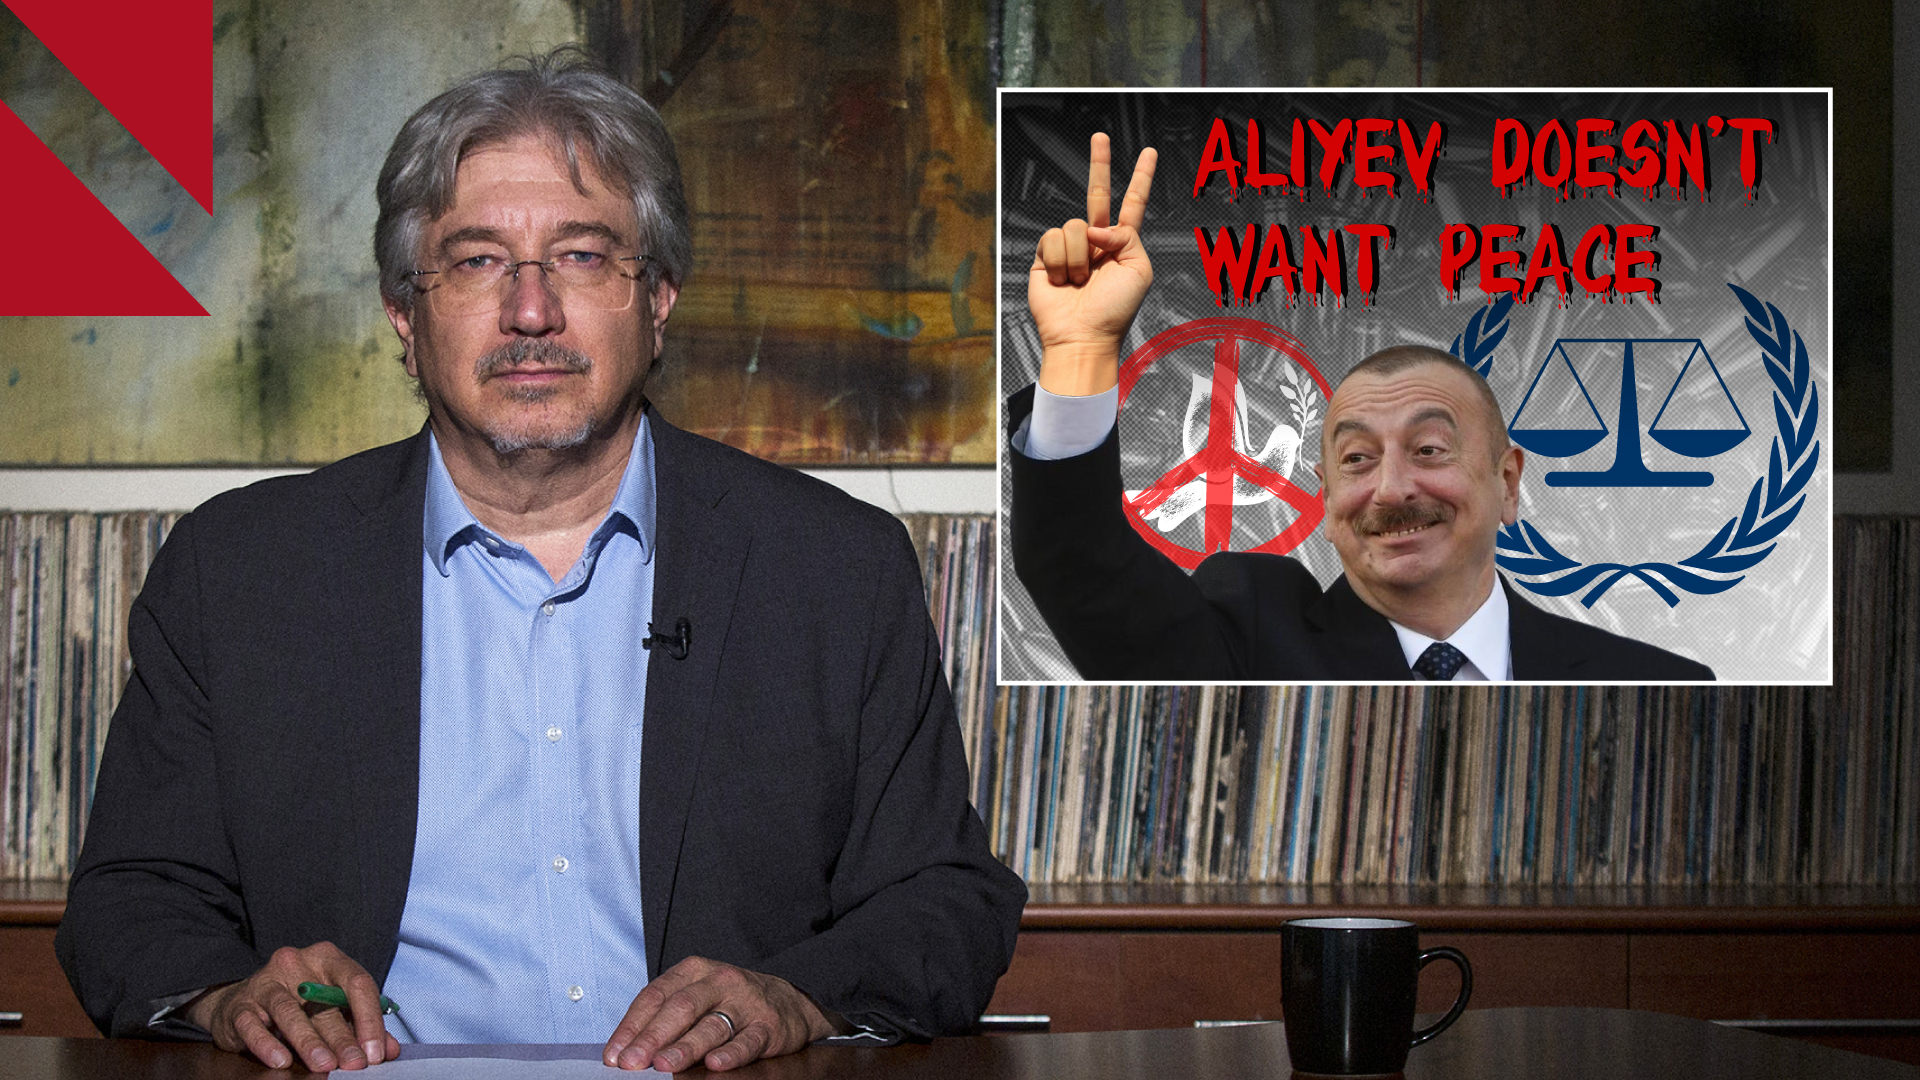 Aliyev and his disingenuous peace